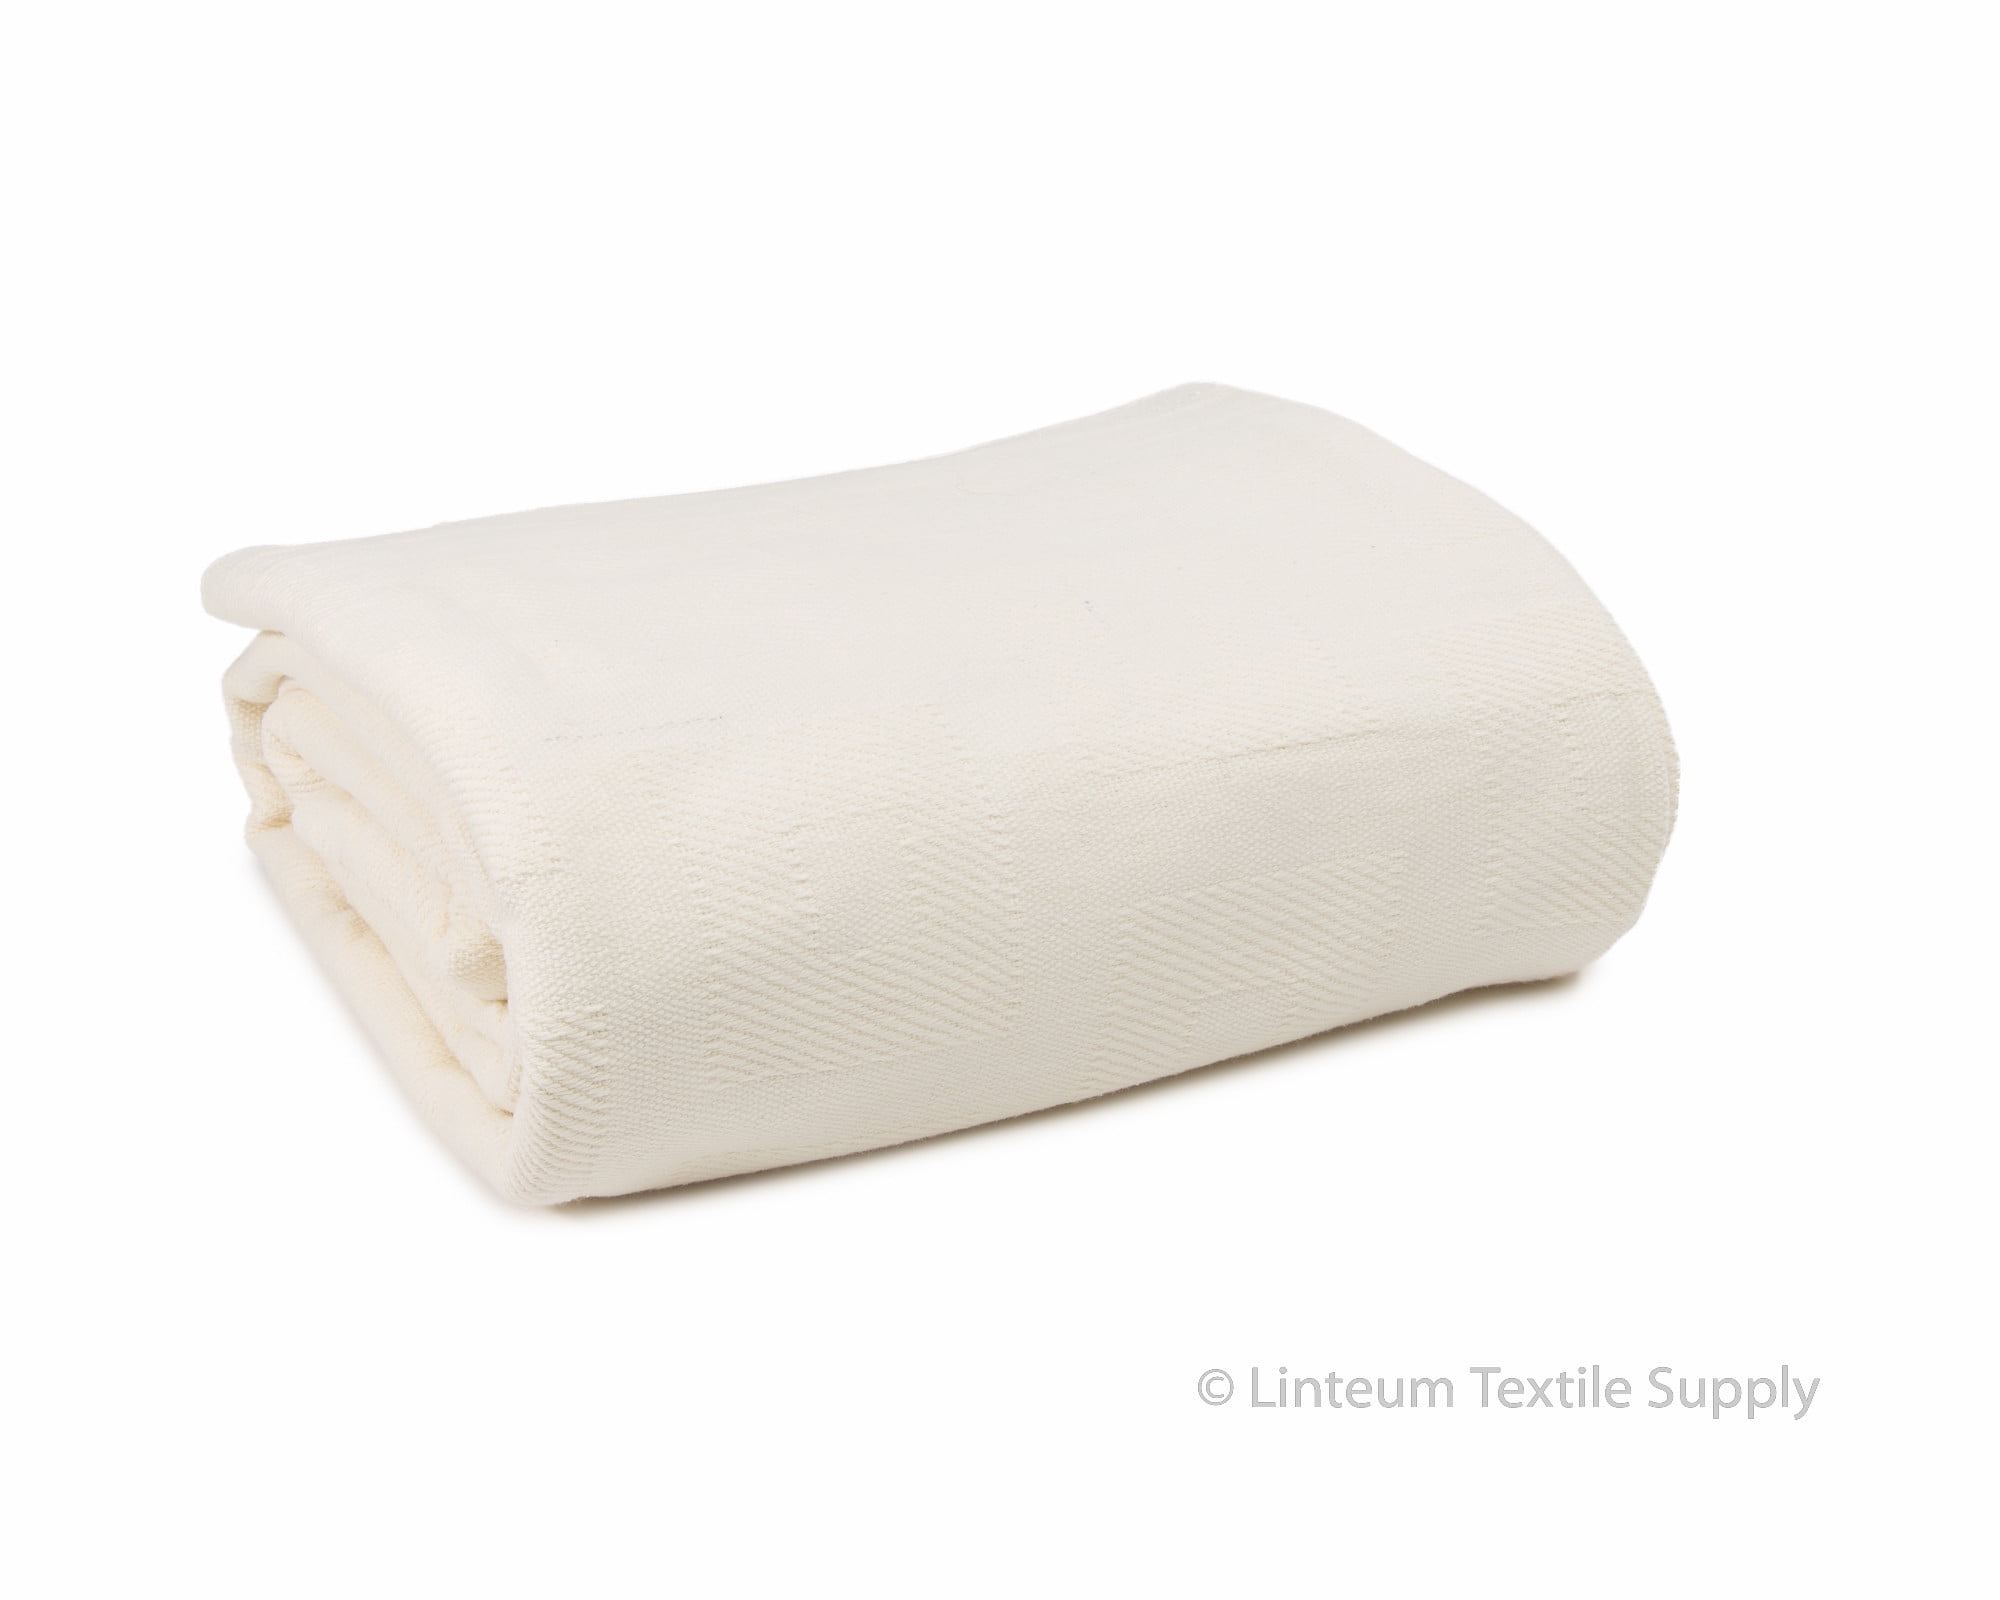 Textile 100% Thermal Blanket, Hospital White) (74x100 Cotton SNAGLESS in, Spread Linteum